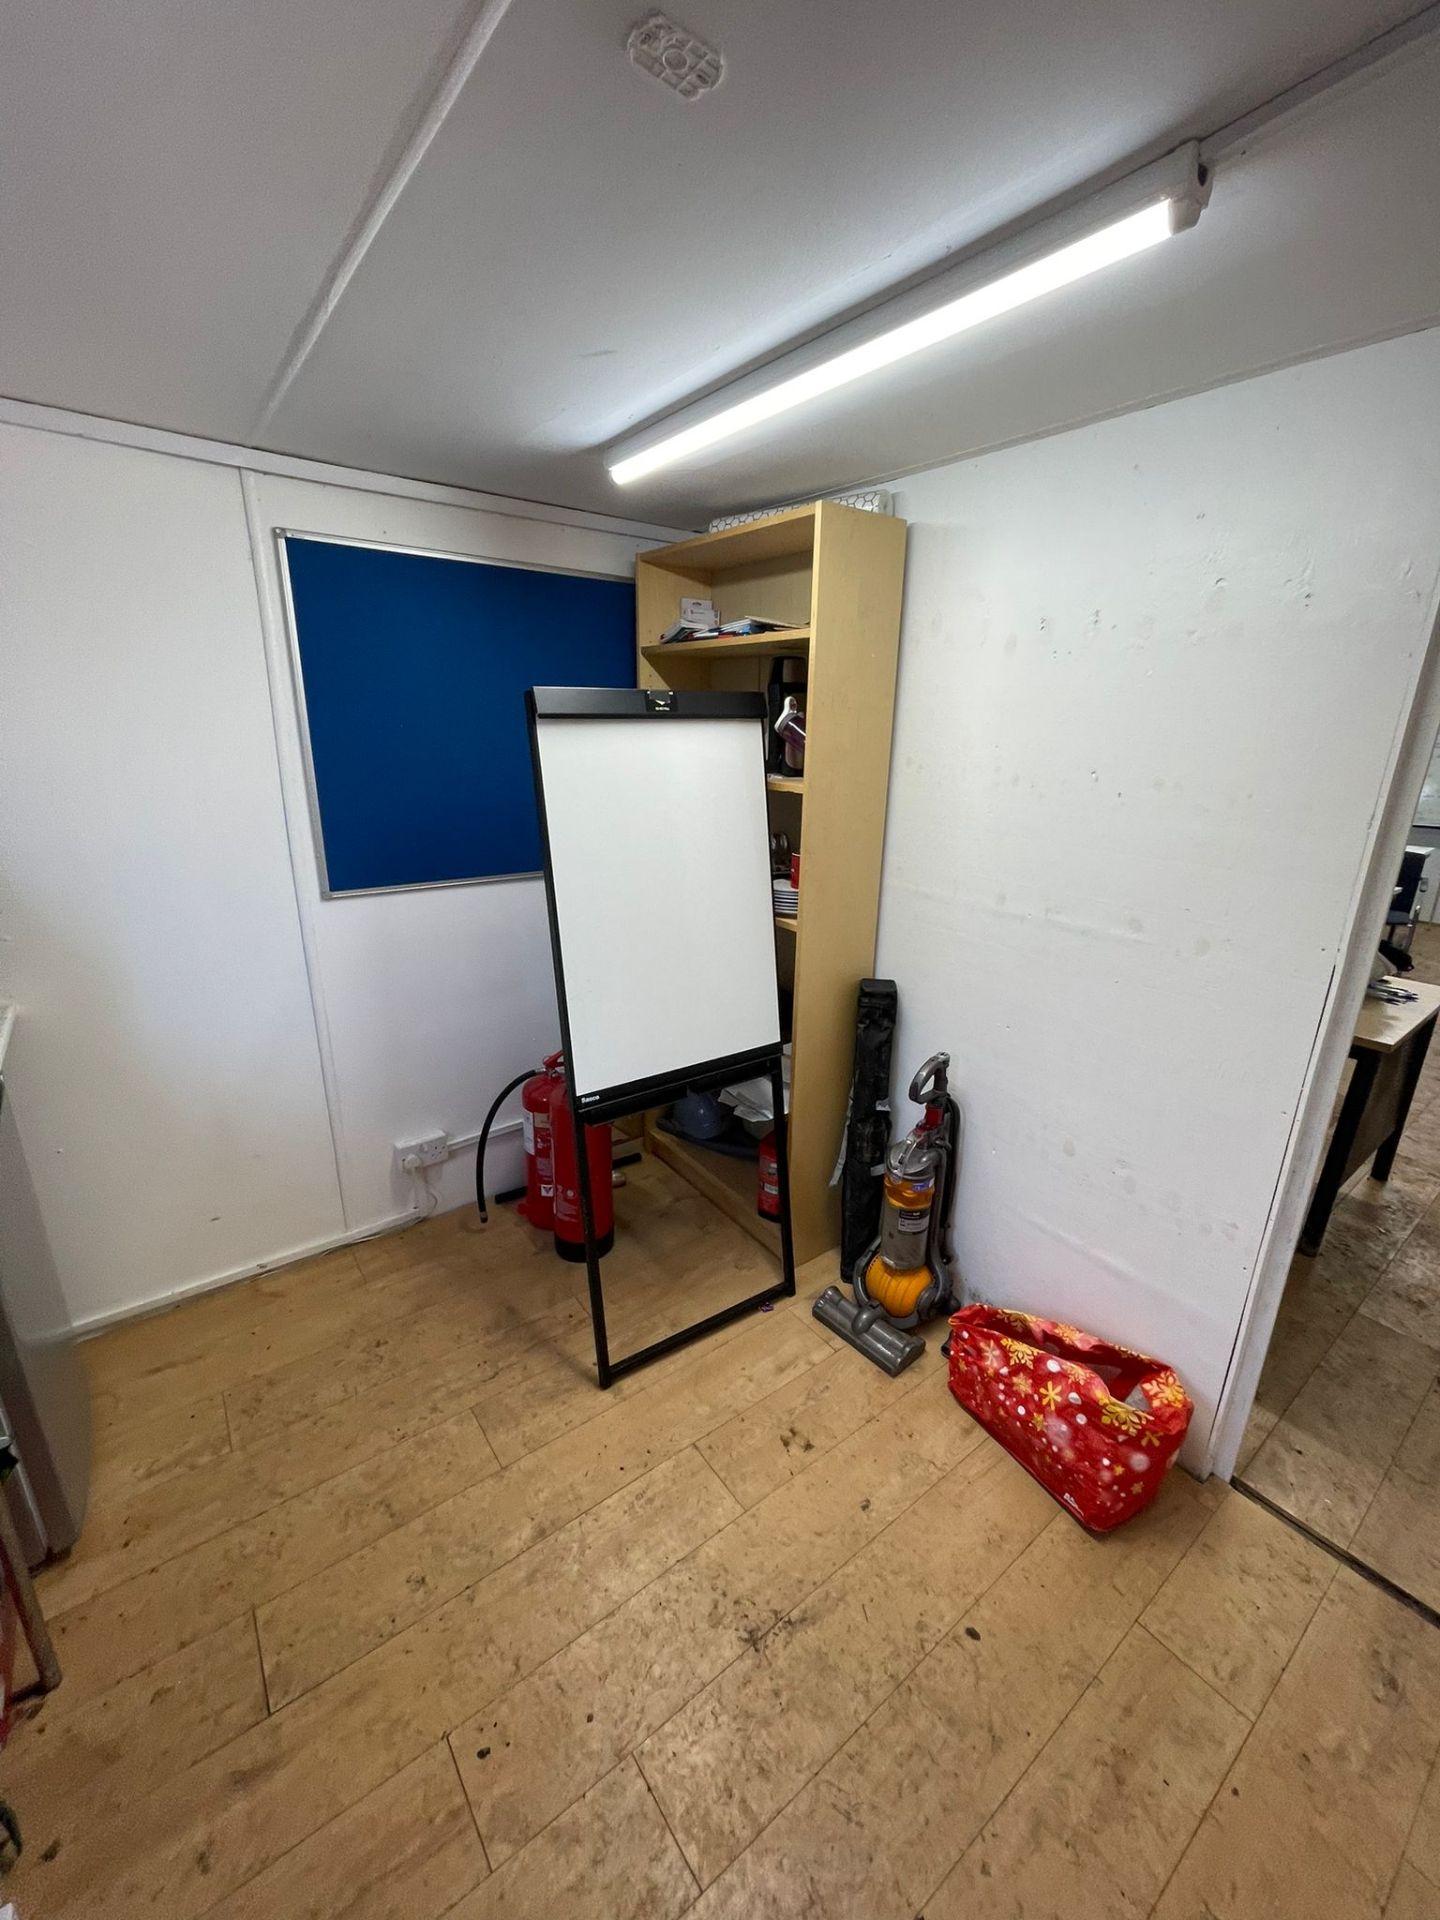 32FT X 10FT ANTI-VANDAL CABIN - OFFICE/ TRAINING ROOM AND SMALL CANTEEN AREA. - Image 2 of 8